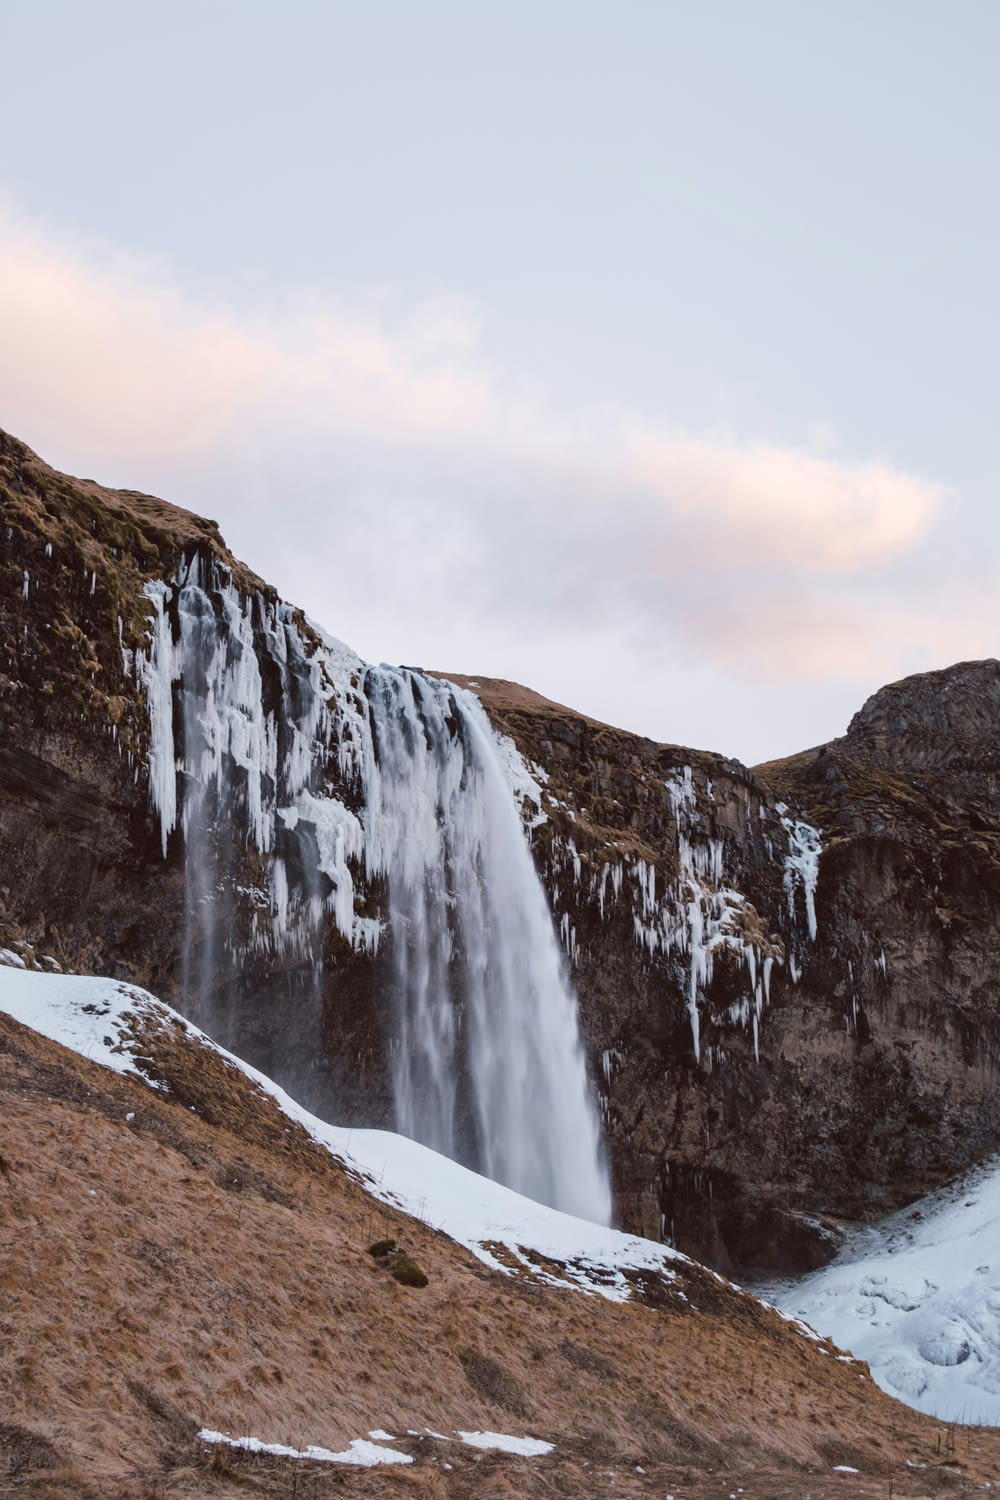 a very tall waterfall in the middle of a snowy field